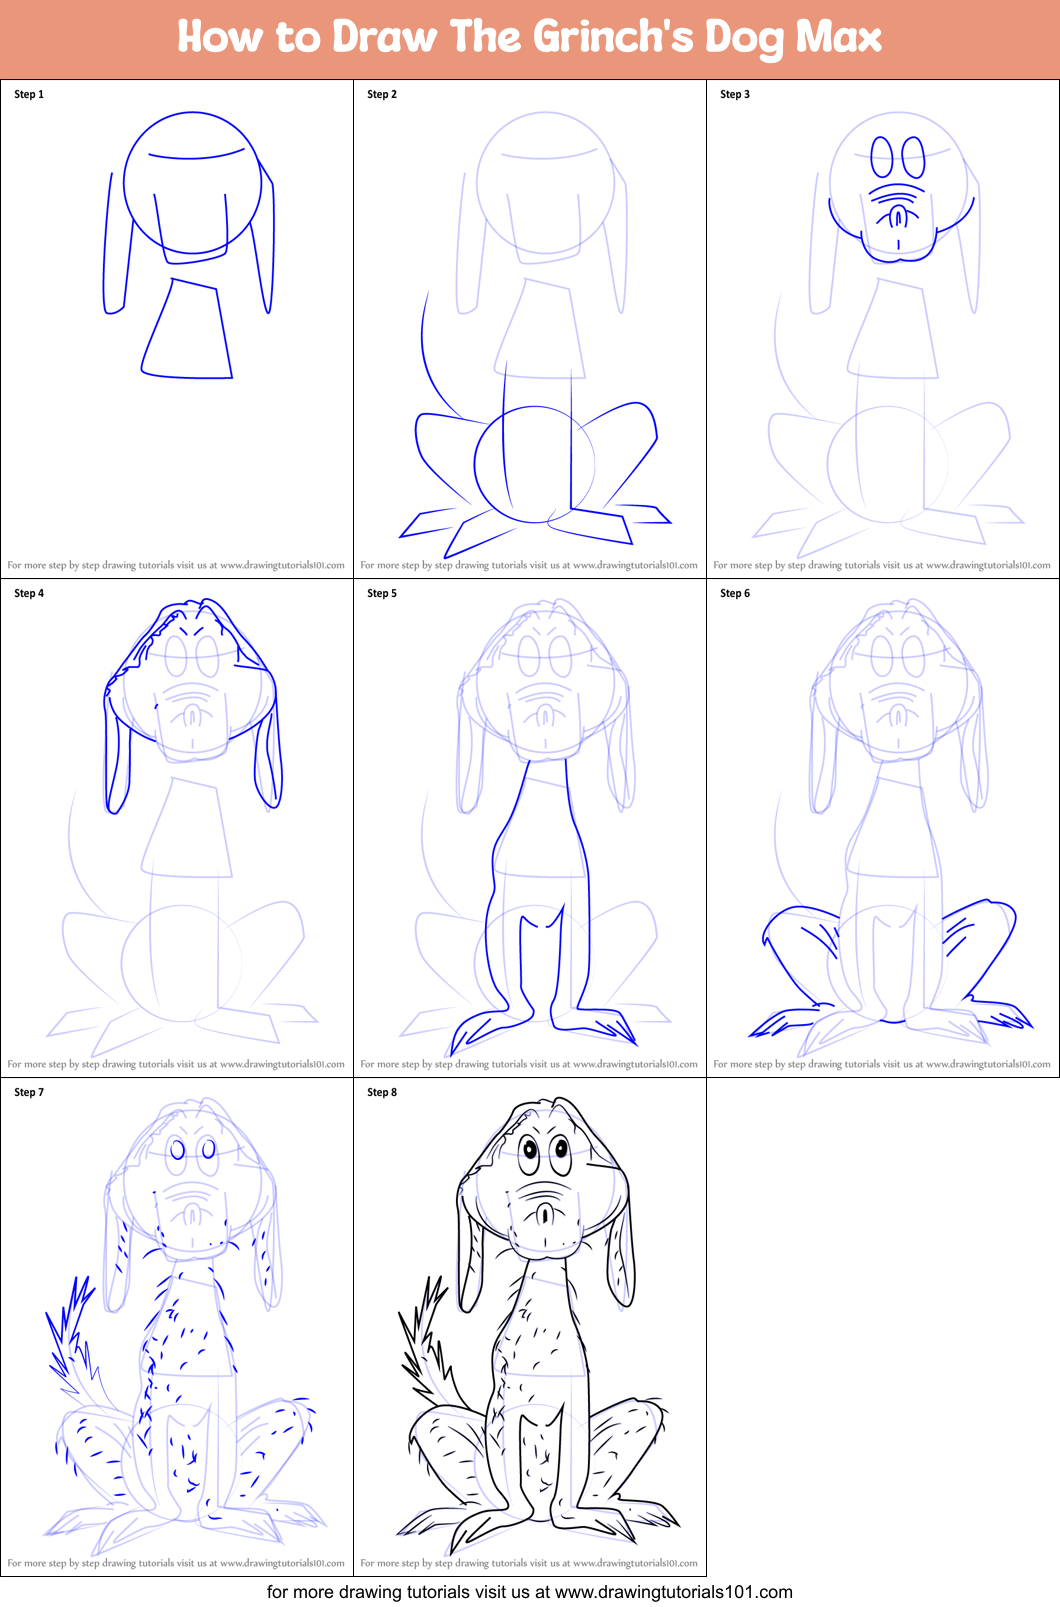 How to Draw The Grinch's Dog Max printable step by step drawing sheet